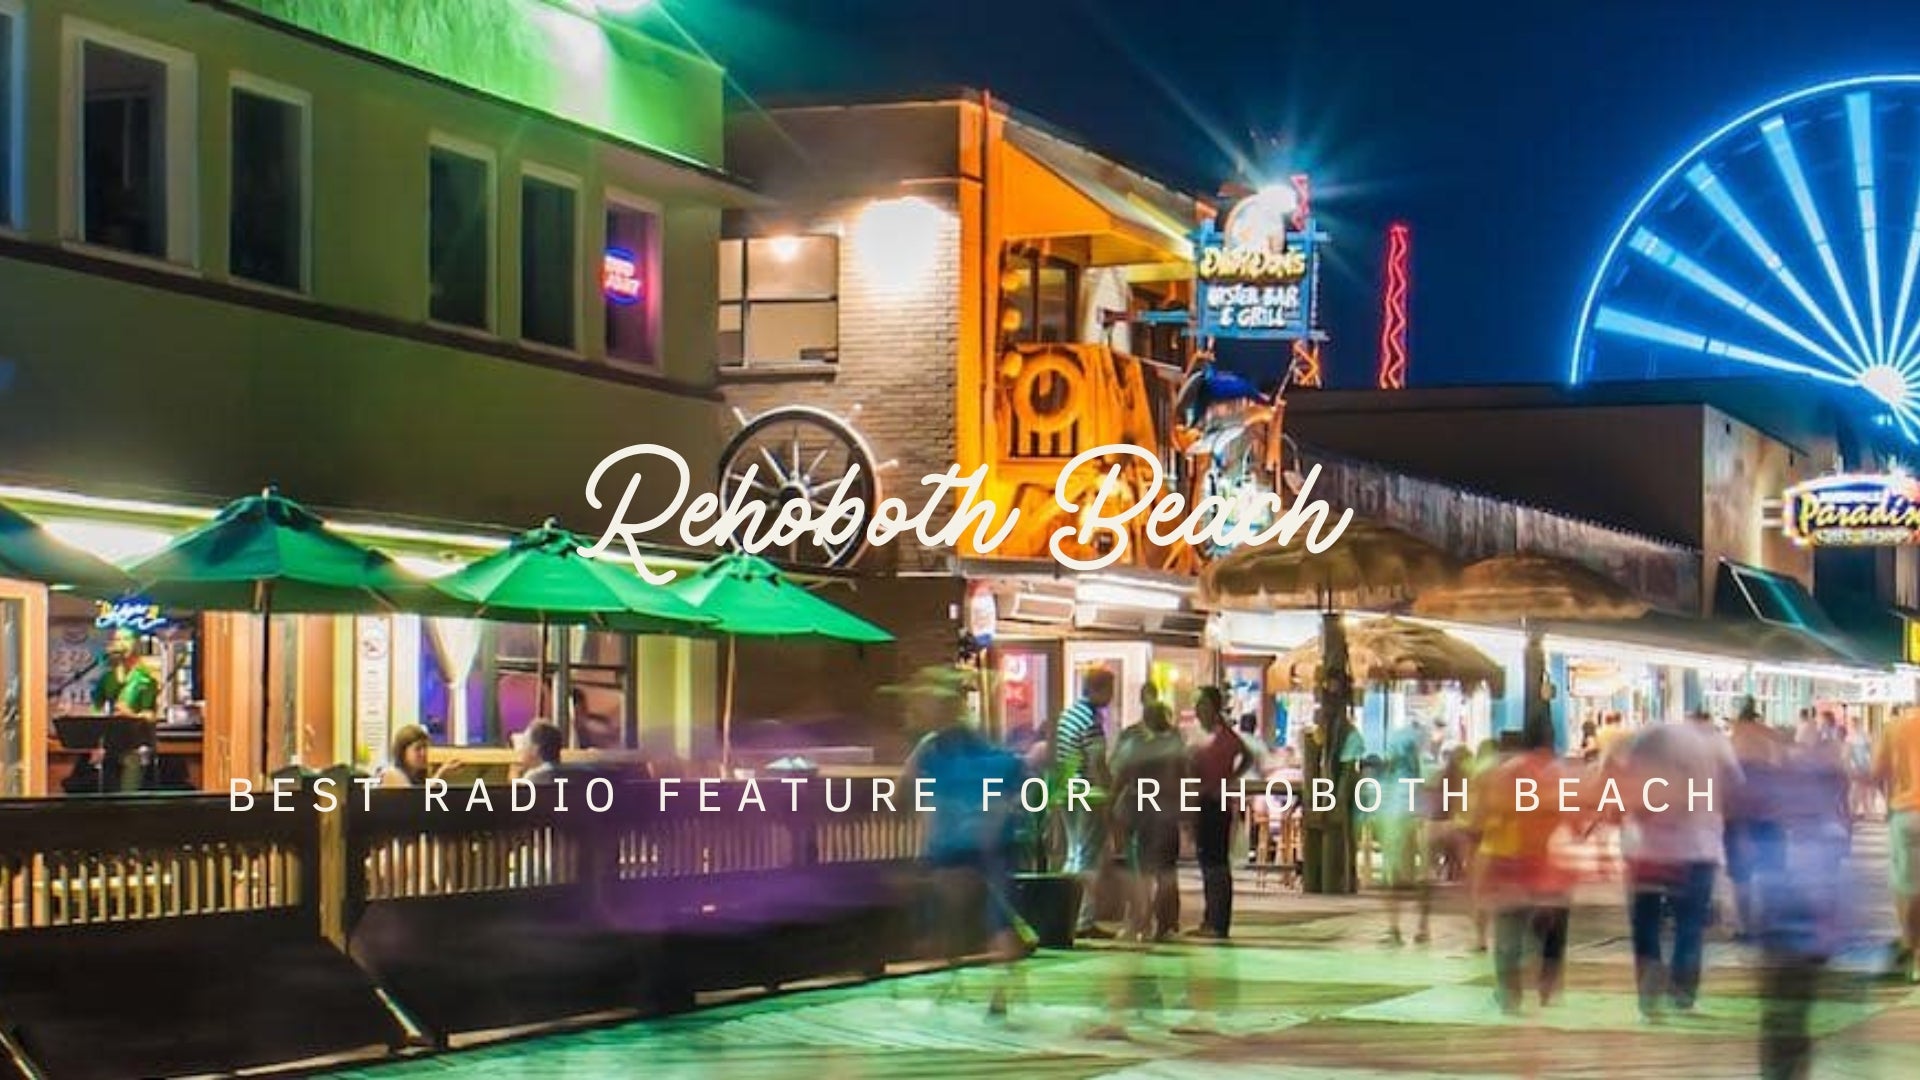 What's The Best Radio For Rehoboth Beach: A Comprehensive Guide